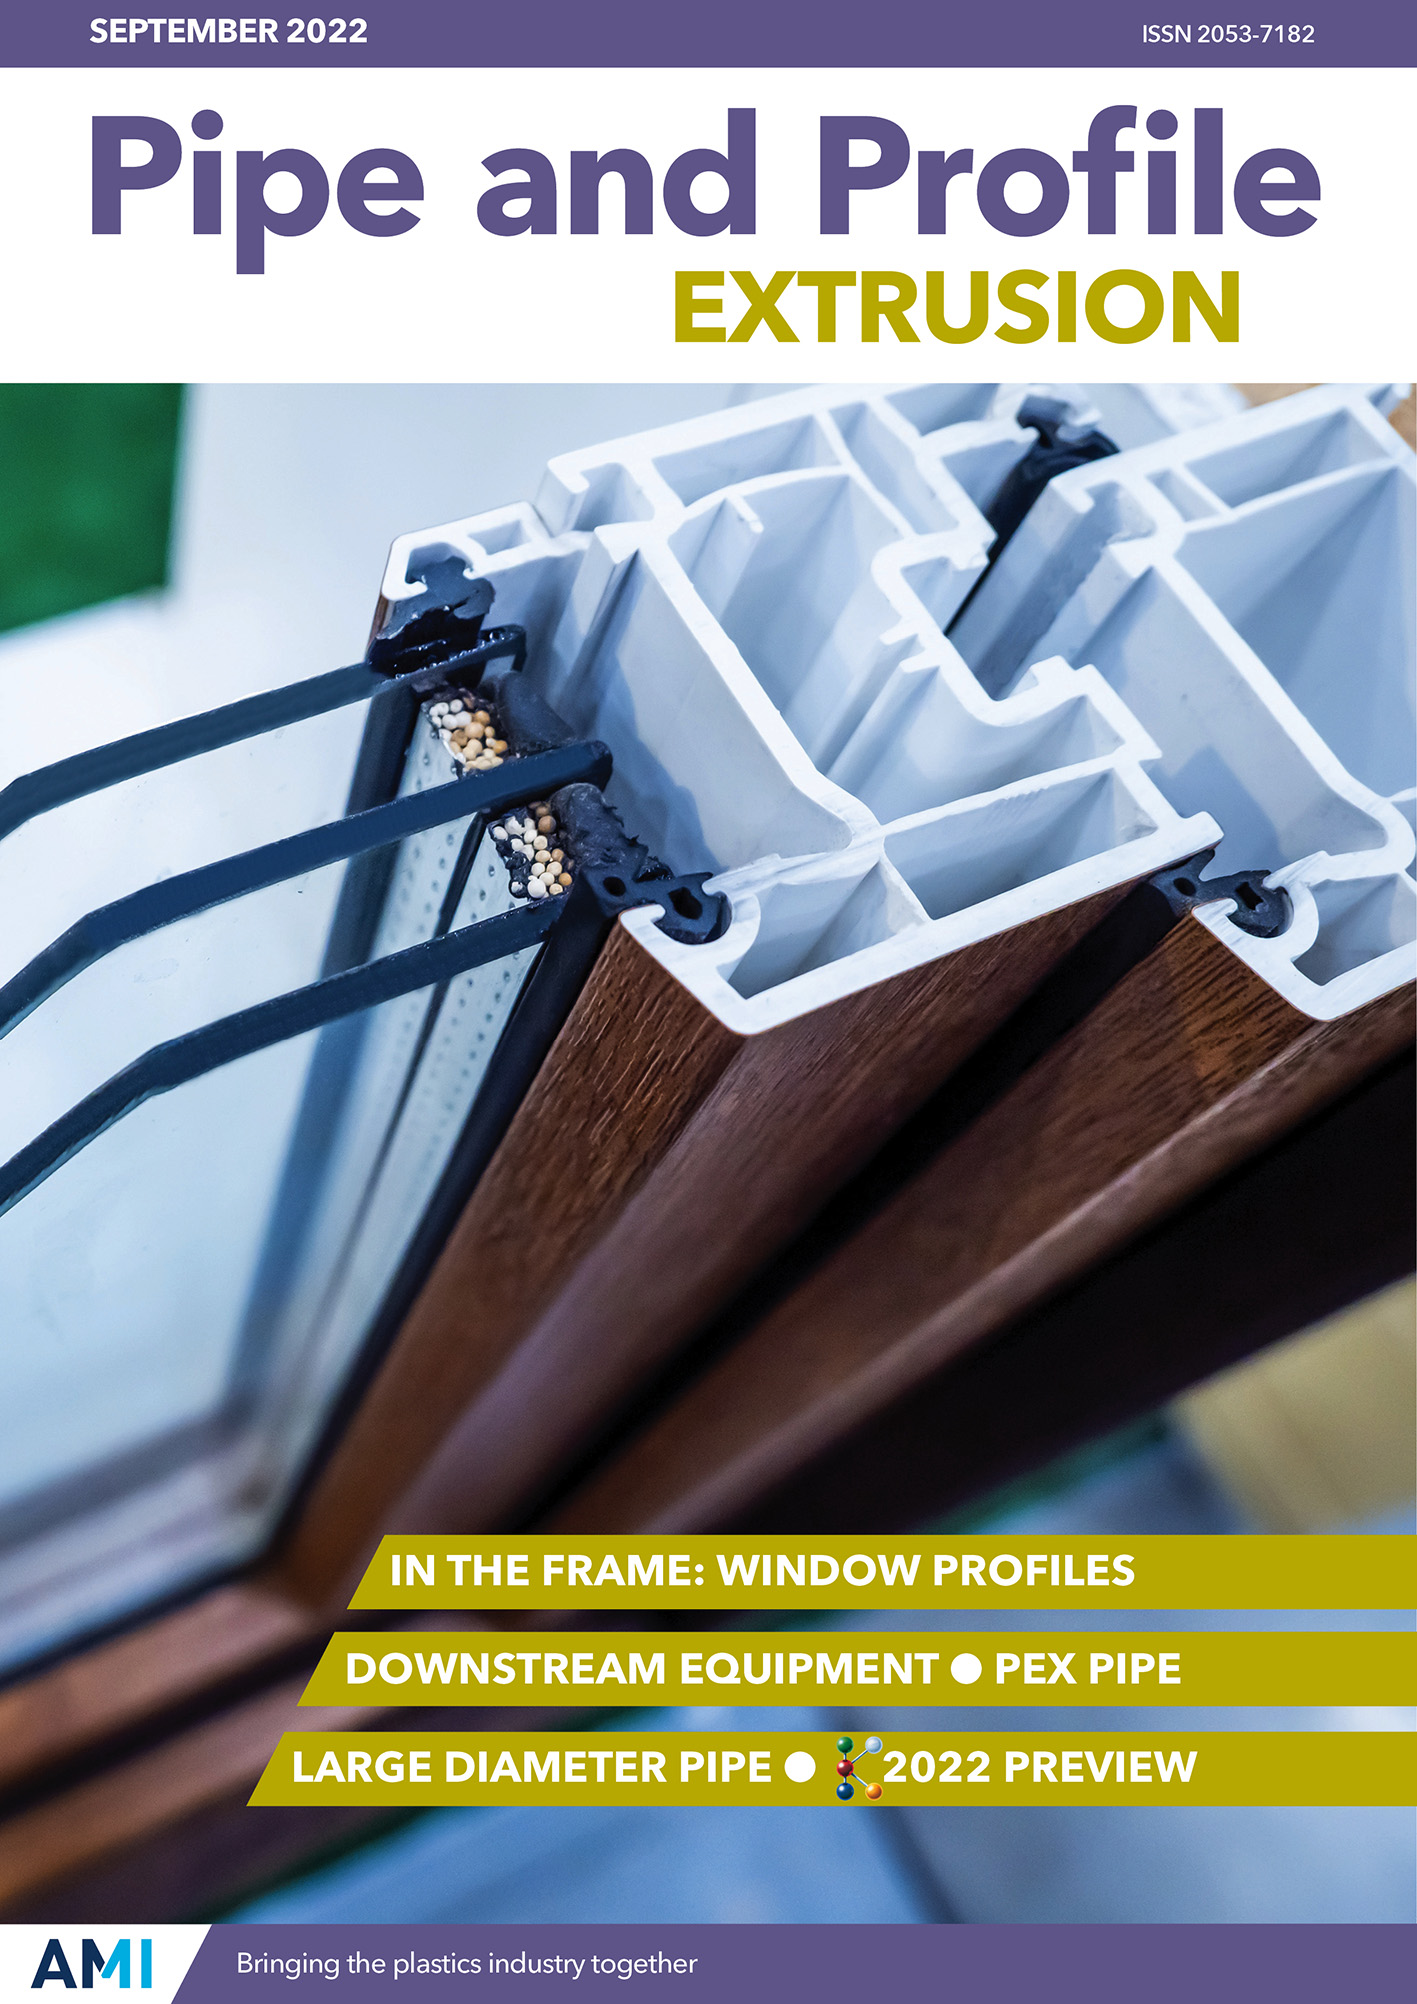 Pipe and Profile Extrusion September 2022